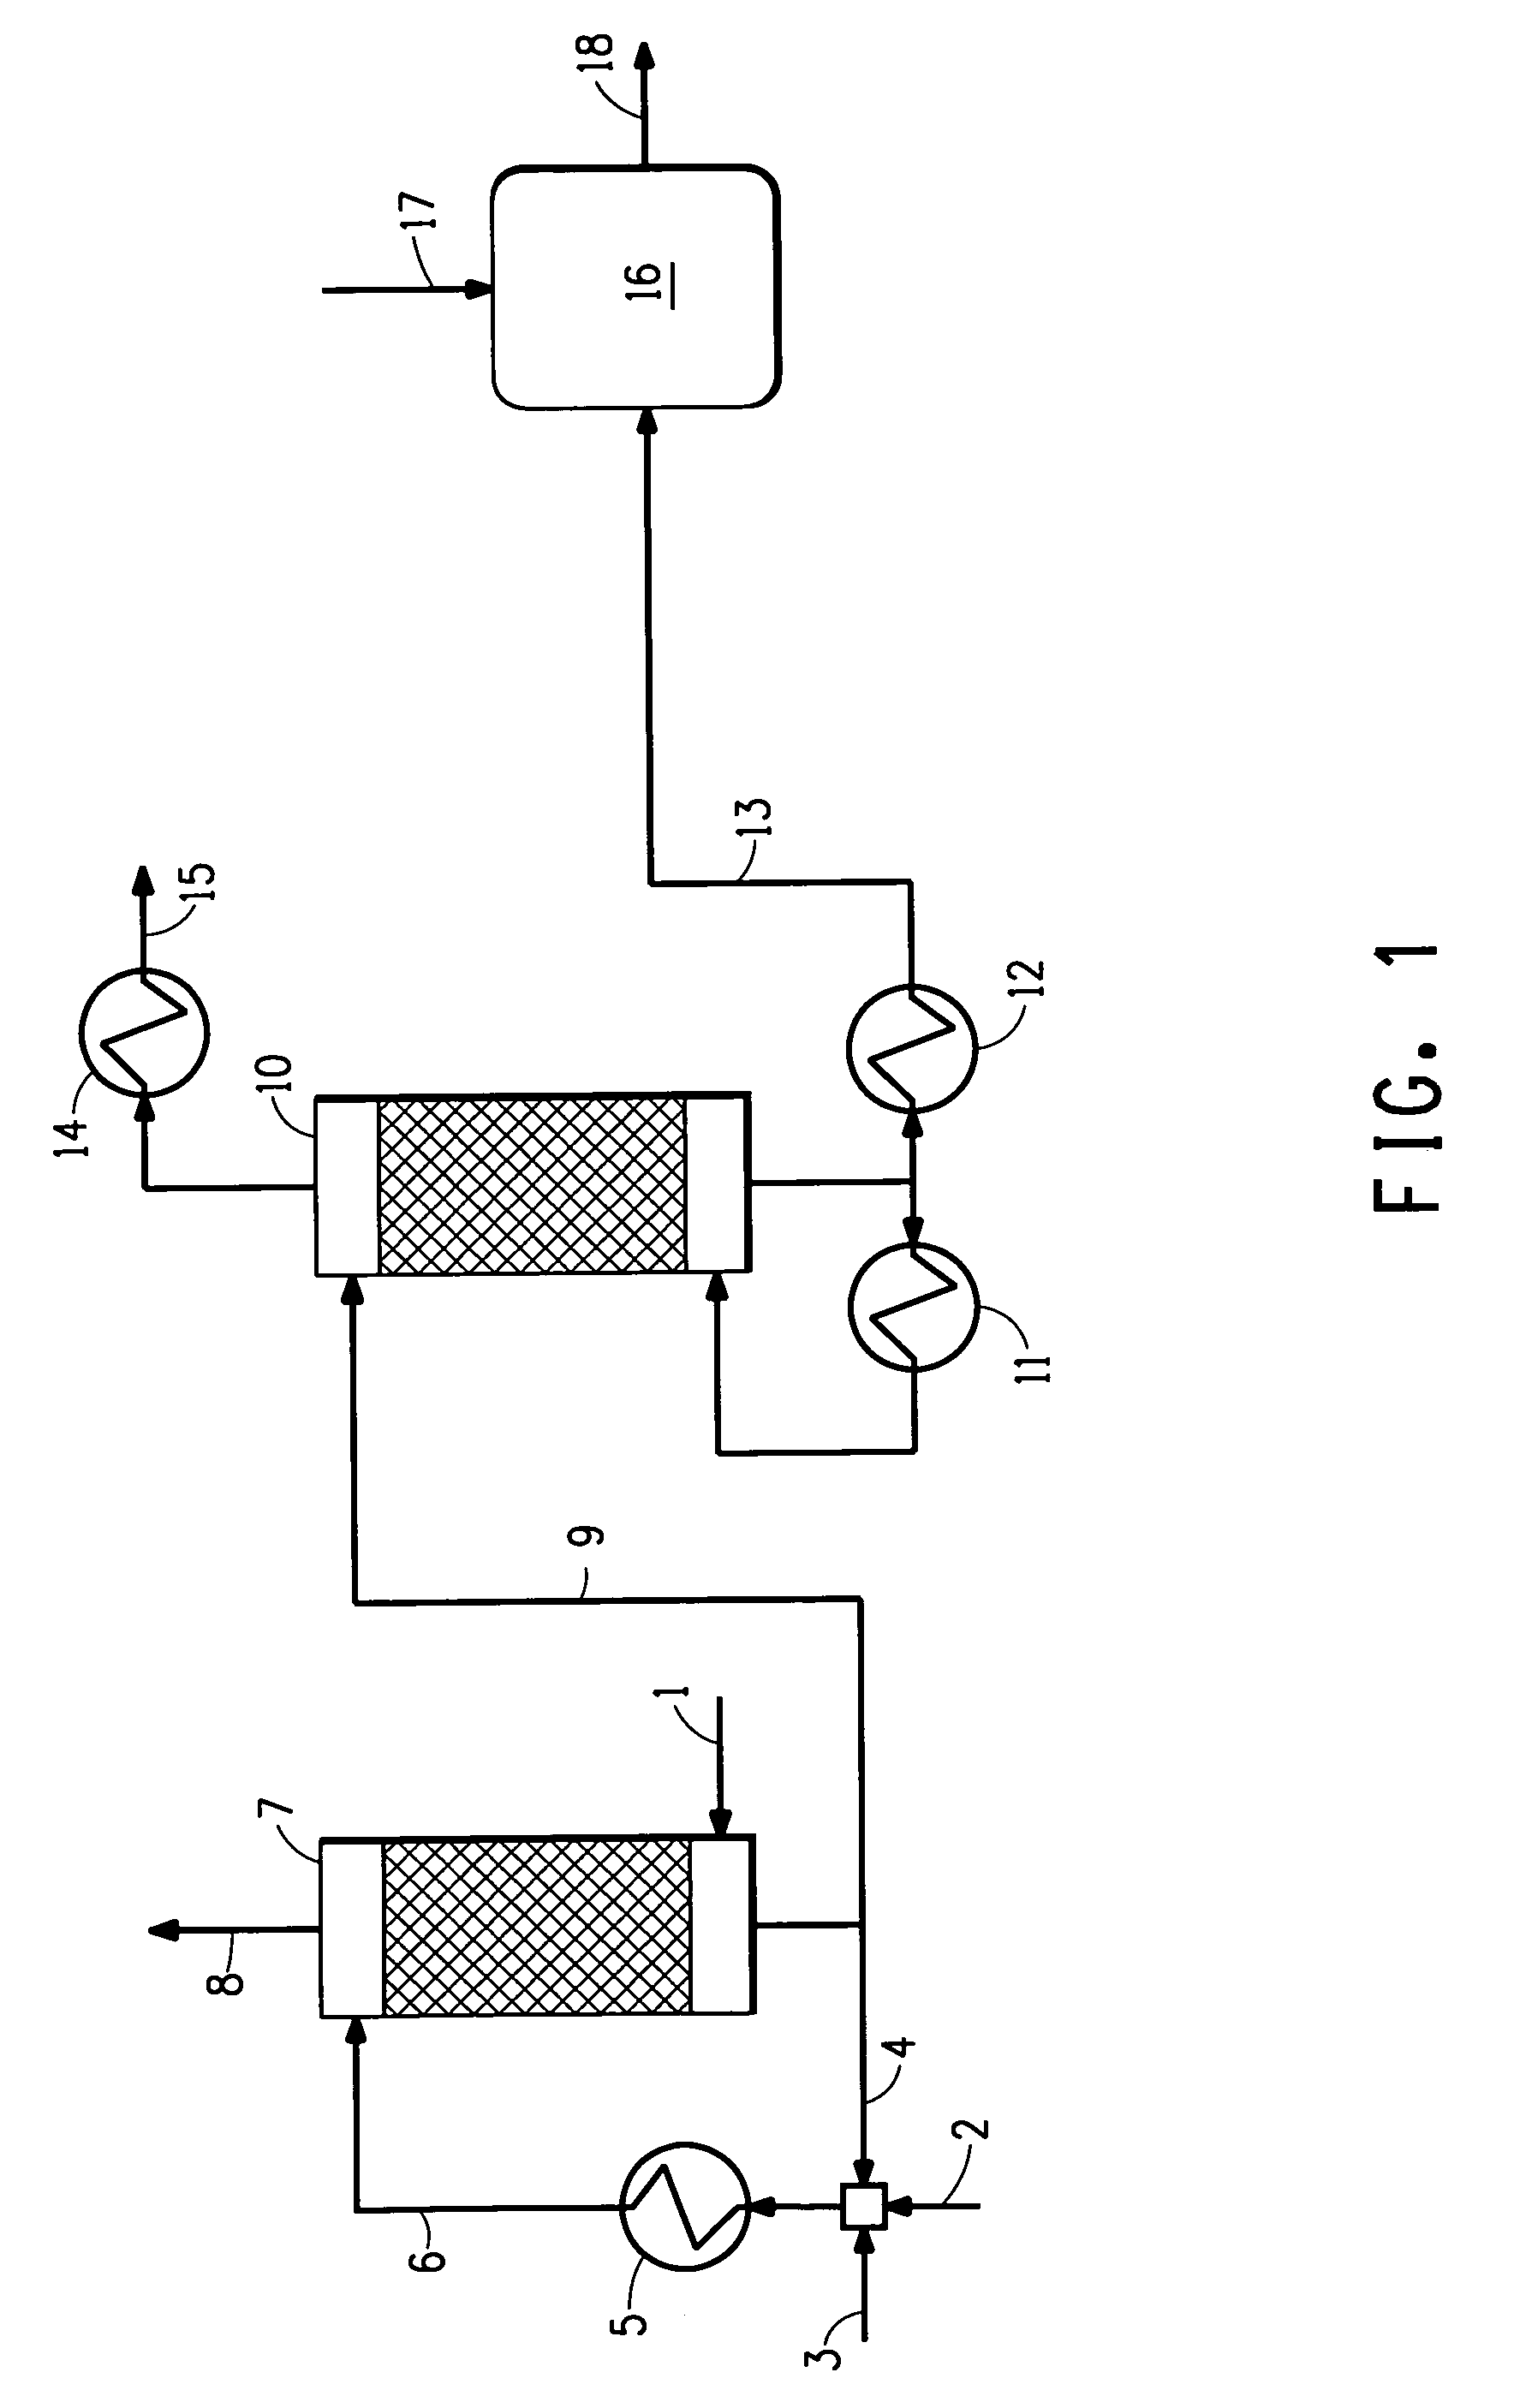 Process for scrubbing ammonia from acid gases comprising ammonia and hydrogen sulfide